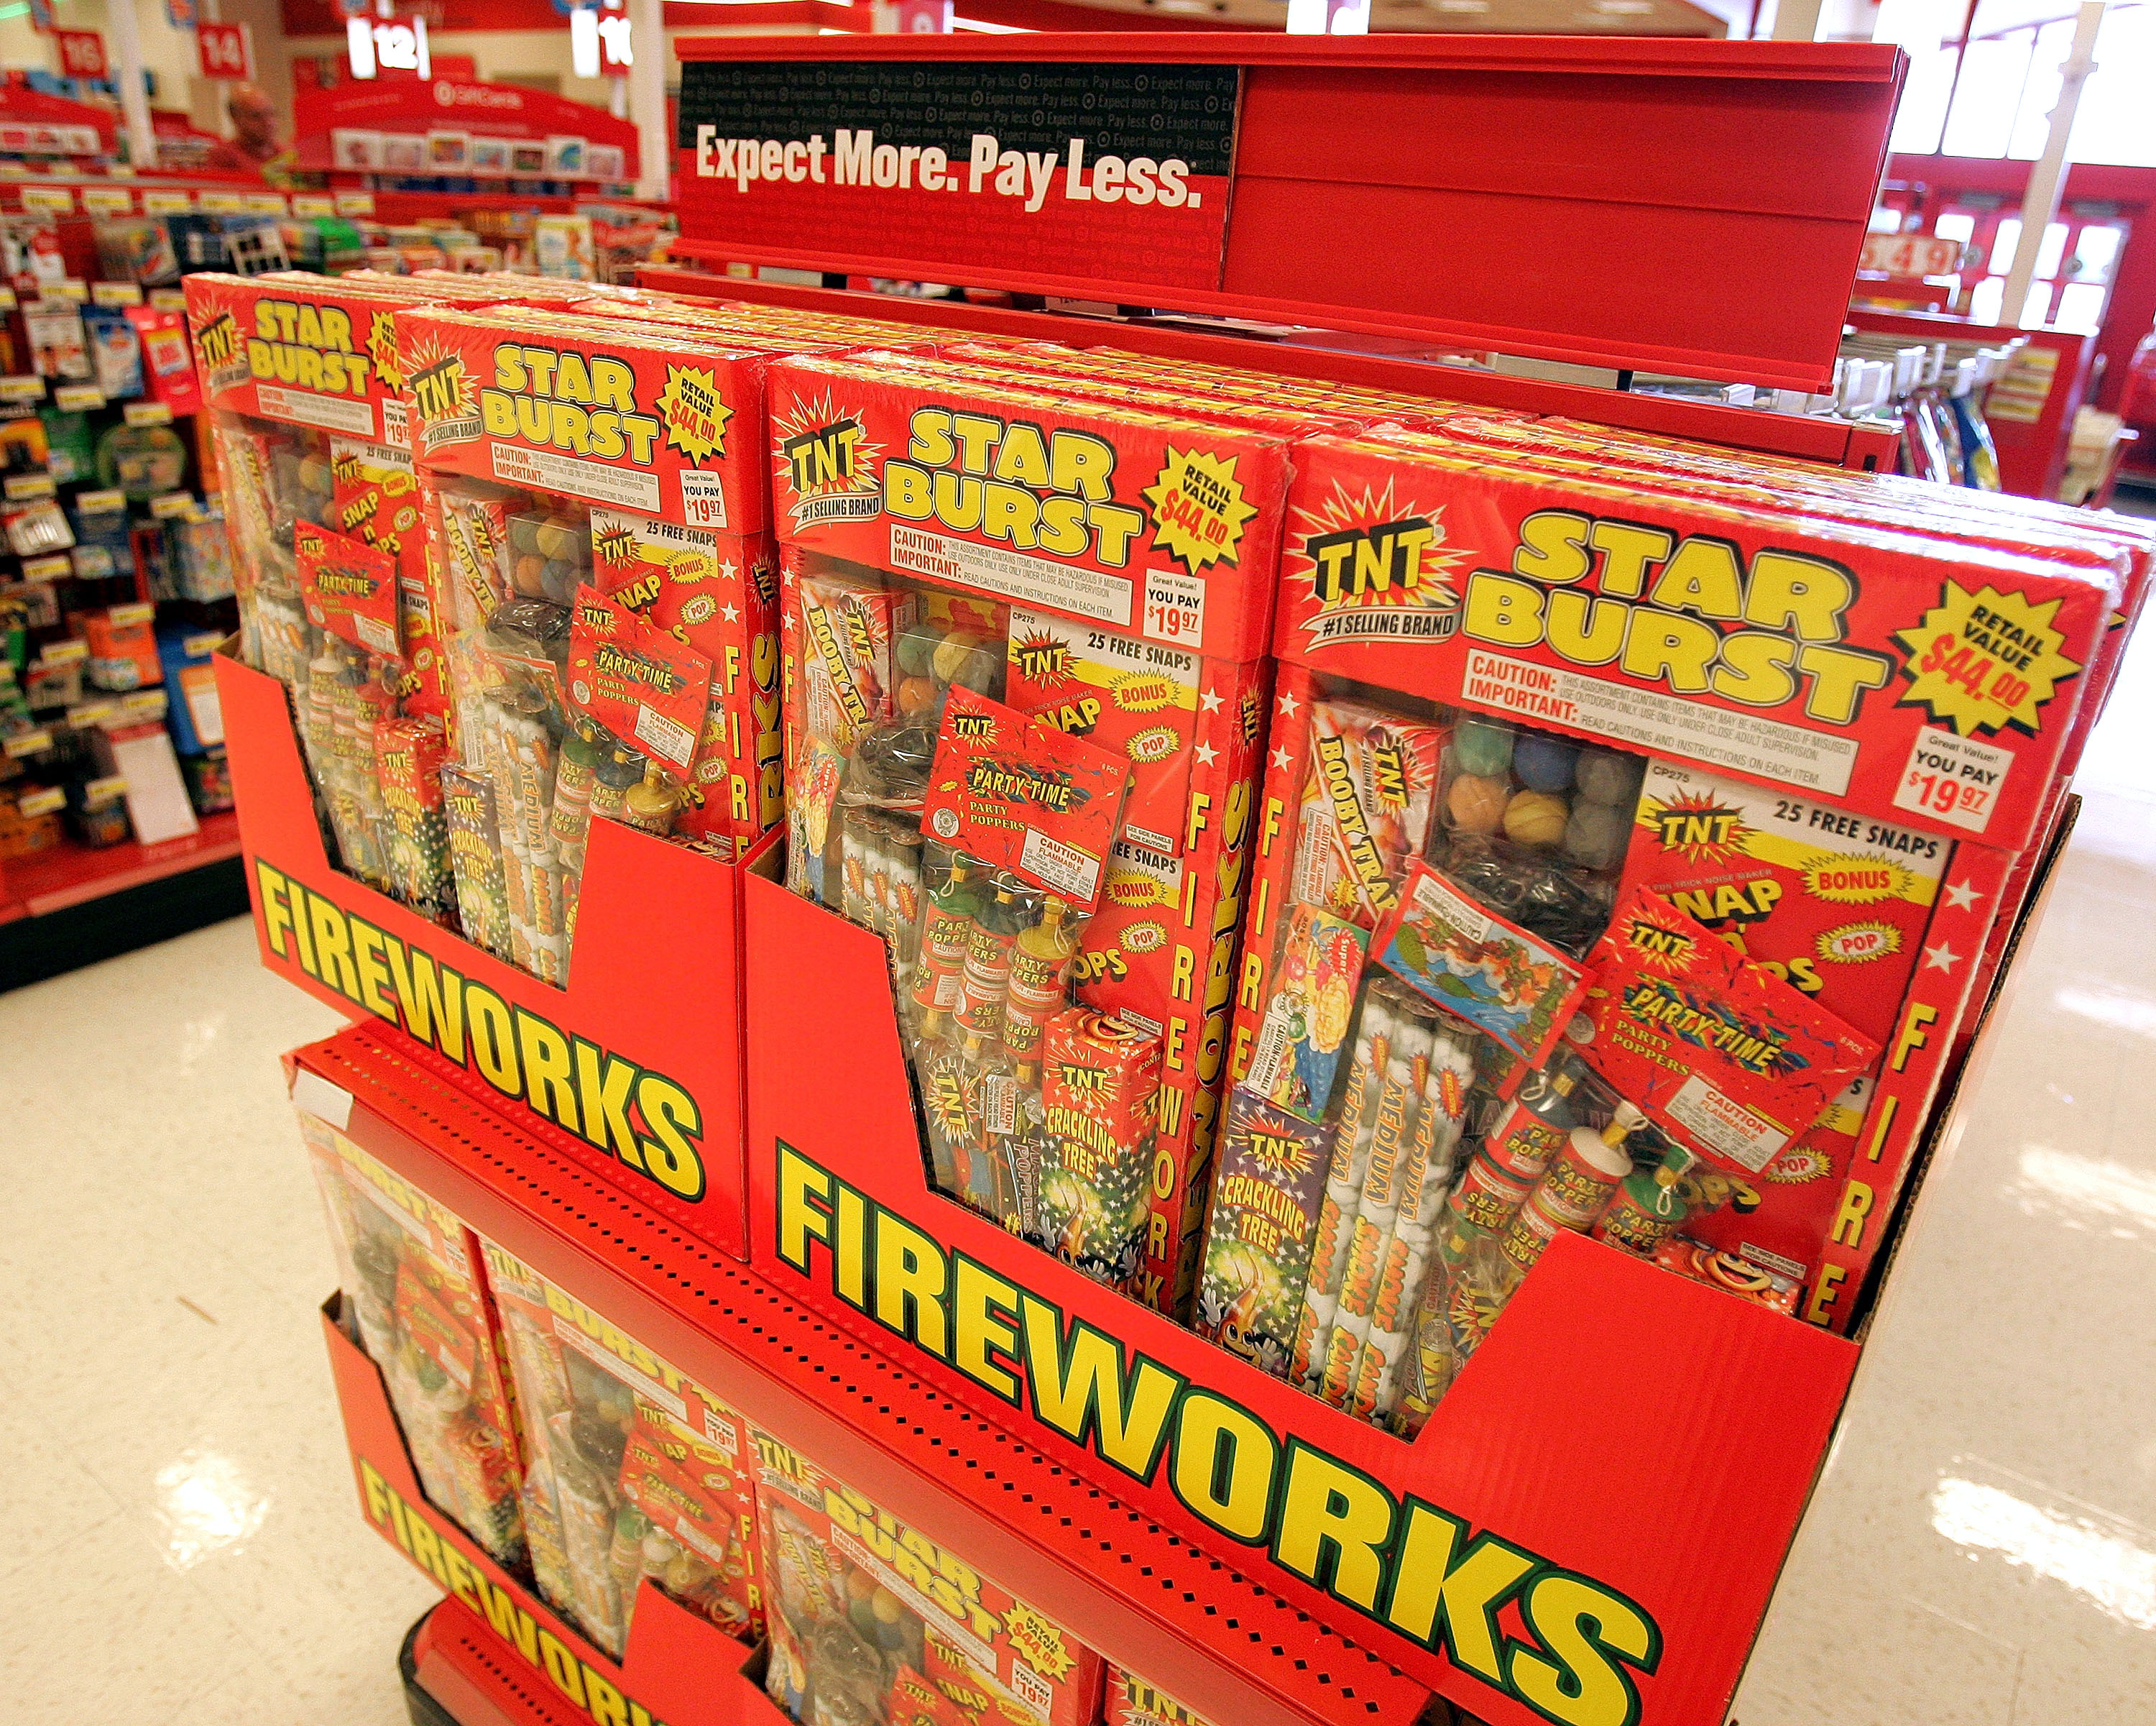 Where to Buy Fireworks Near Me for 4th of July 2020 Can I Buy Now?